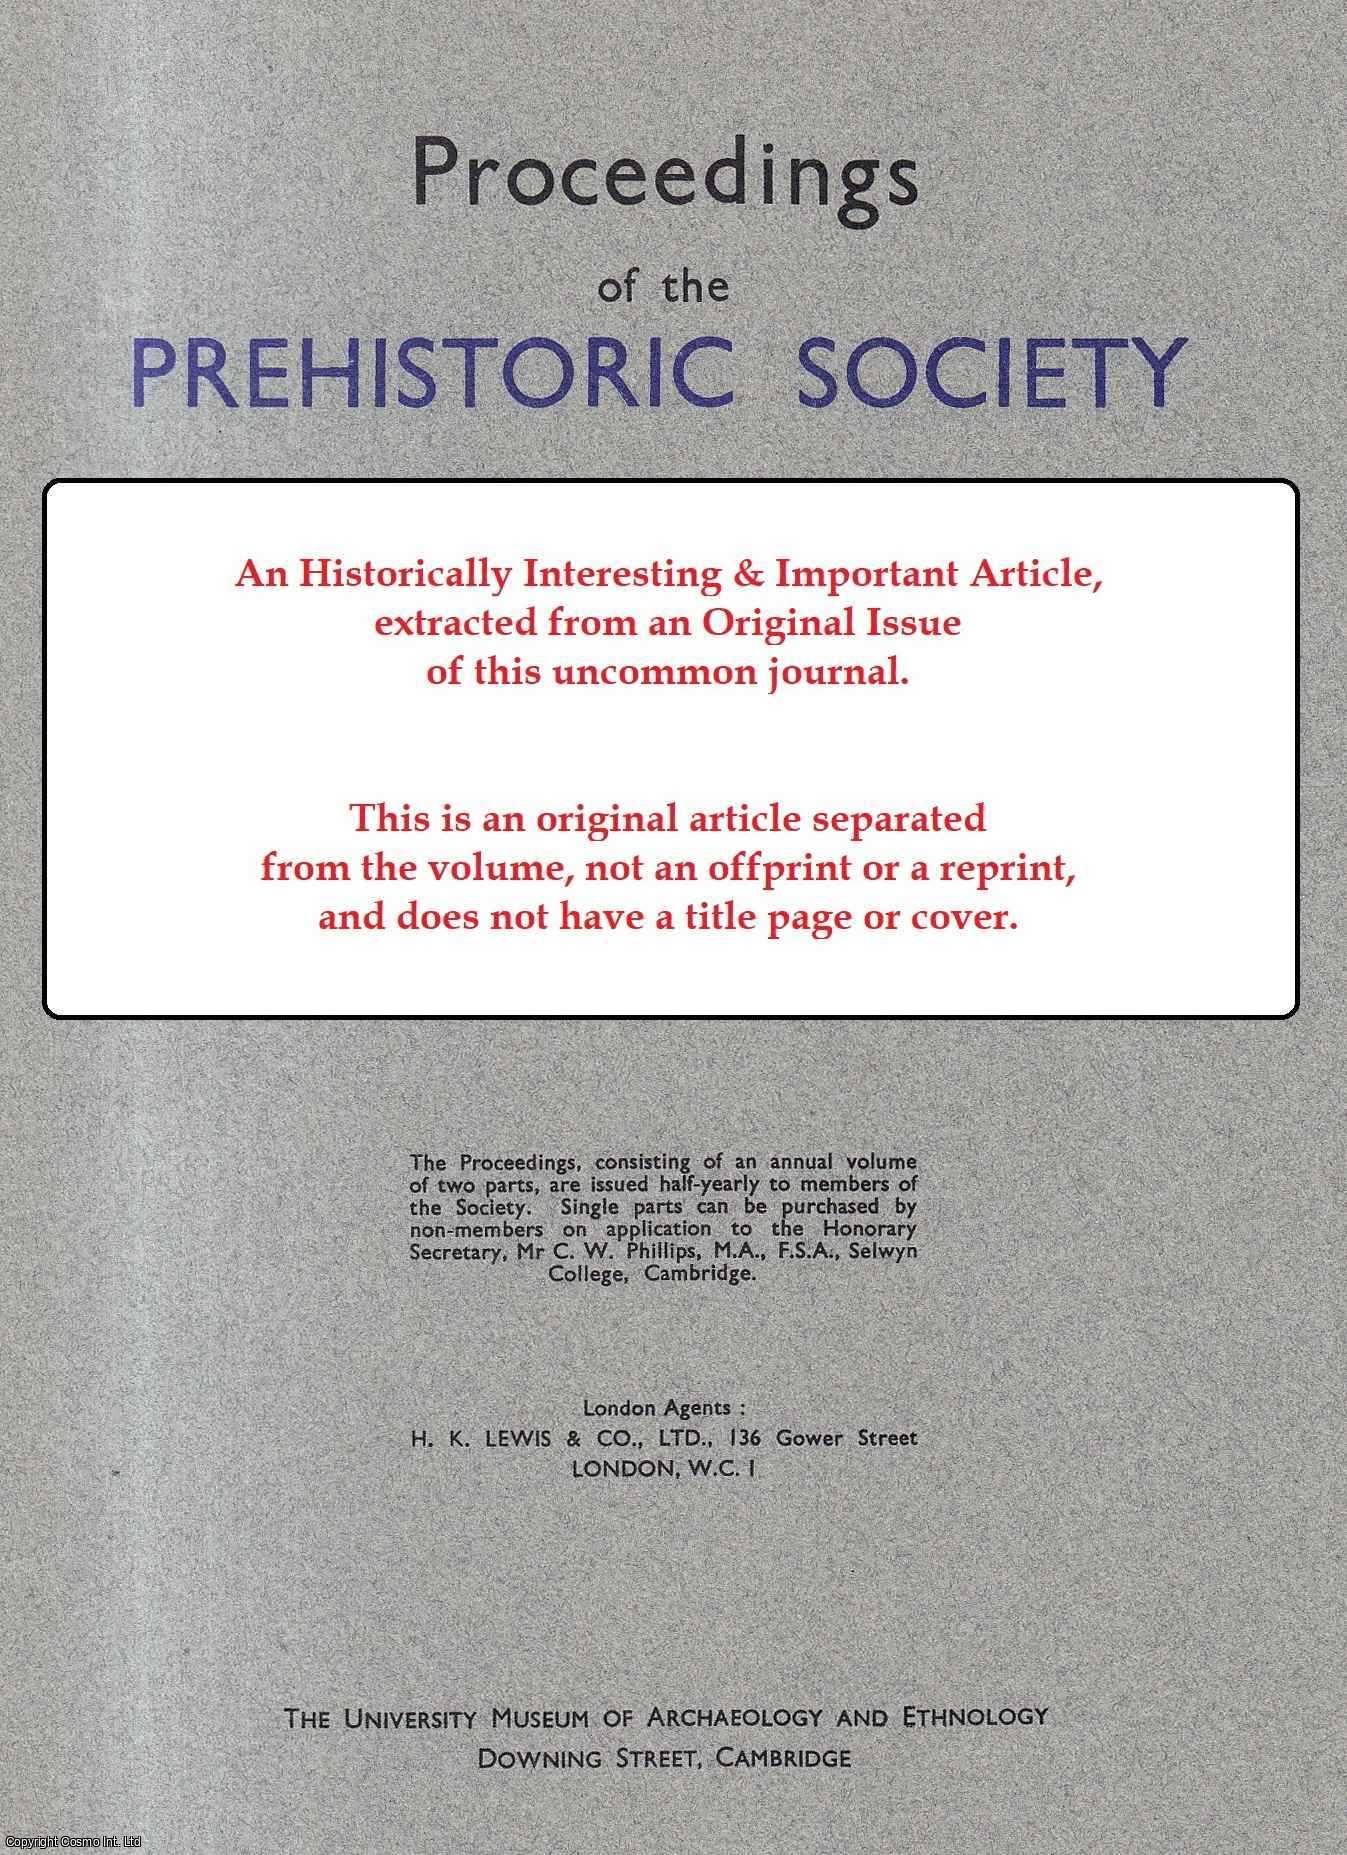 C. M. Piggott - A Late Bronze Age Hoard from Blackrock in Sussex and its Significance. An original article from Proceedings of the Prehistoric Society, 1949.